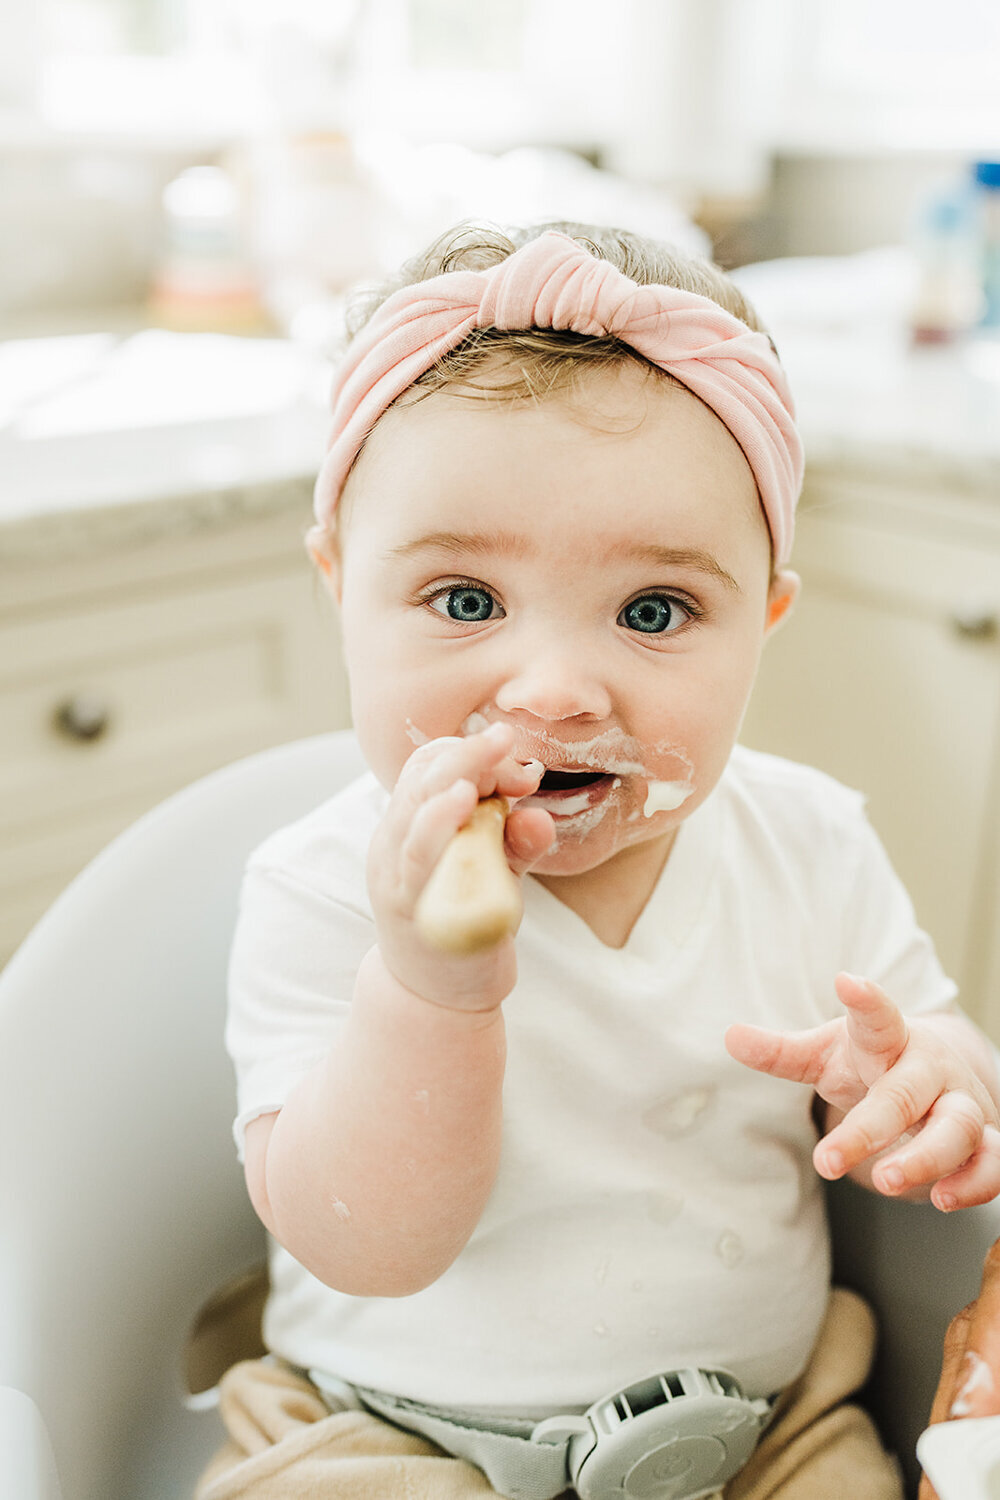 baby smiles at camera with yogurt on face